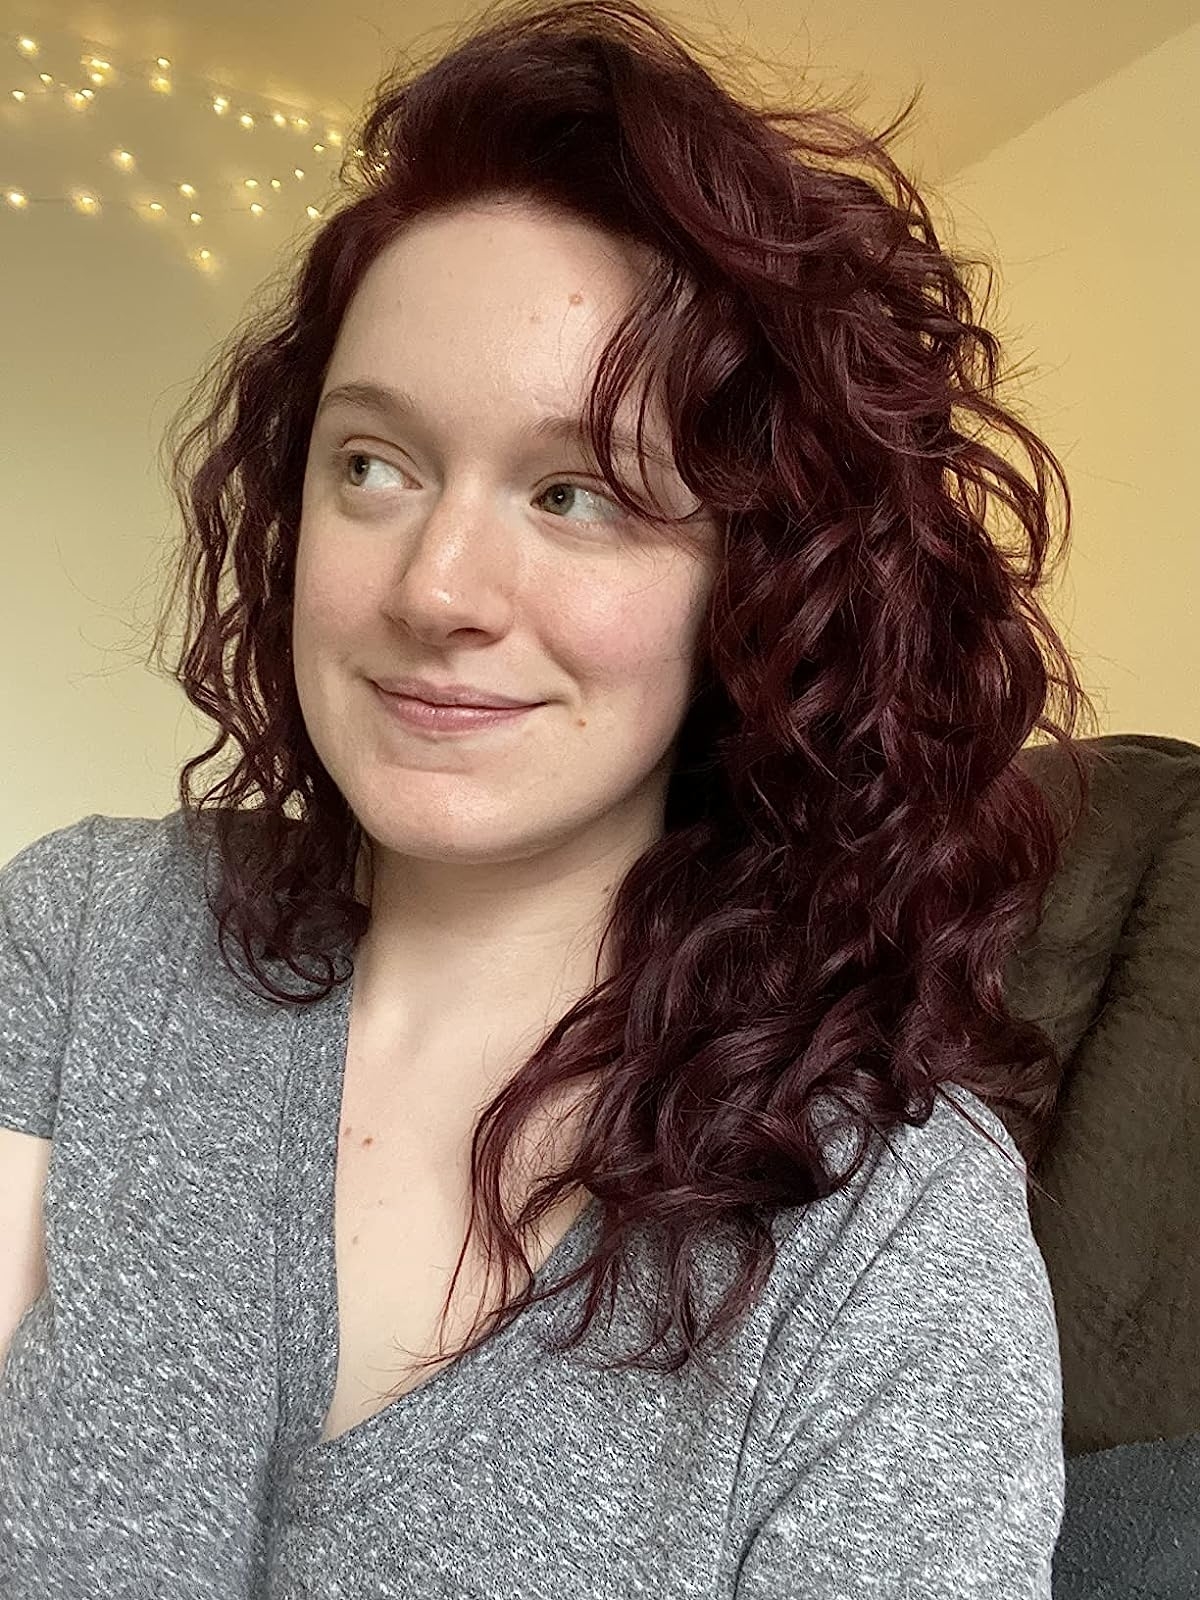 reviewer with curled hair that looks soft and moisturized